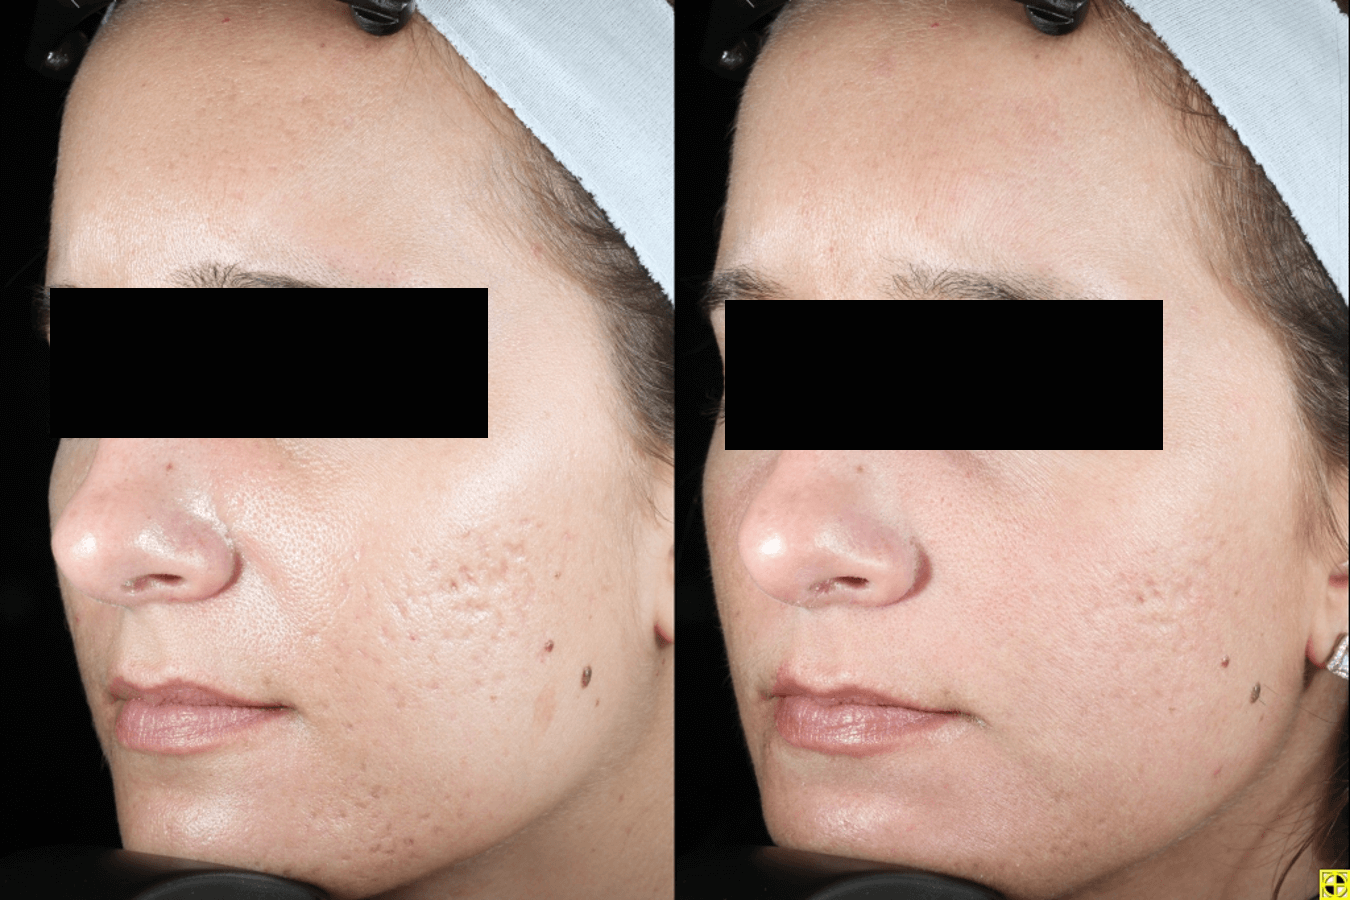 Acne Scaring Treatments Minneapolis *Results may vary per patient.